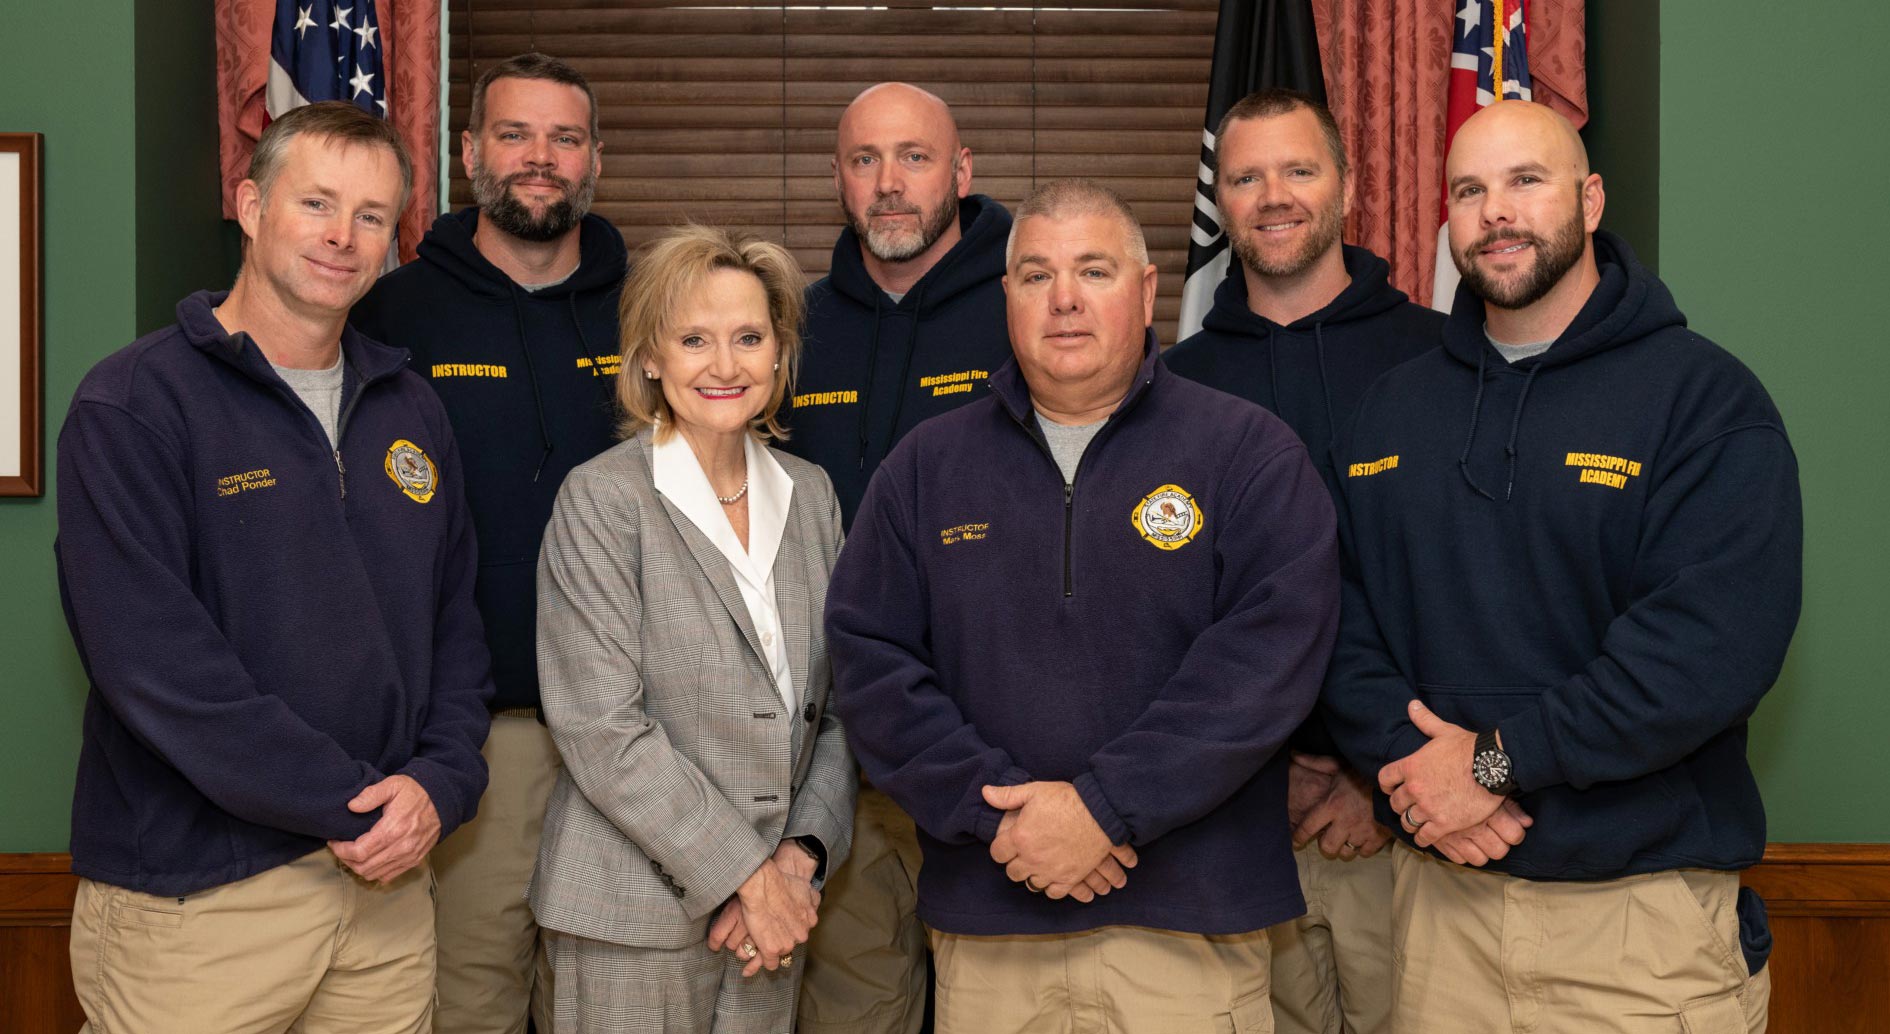 Senator Hyde-Smith commends members of the Mississippi Fire Academy